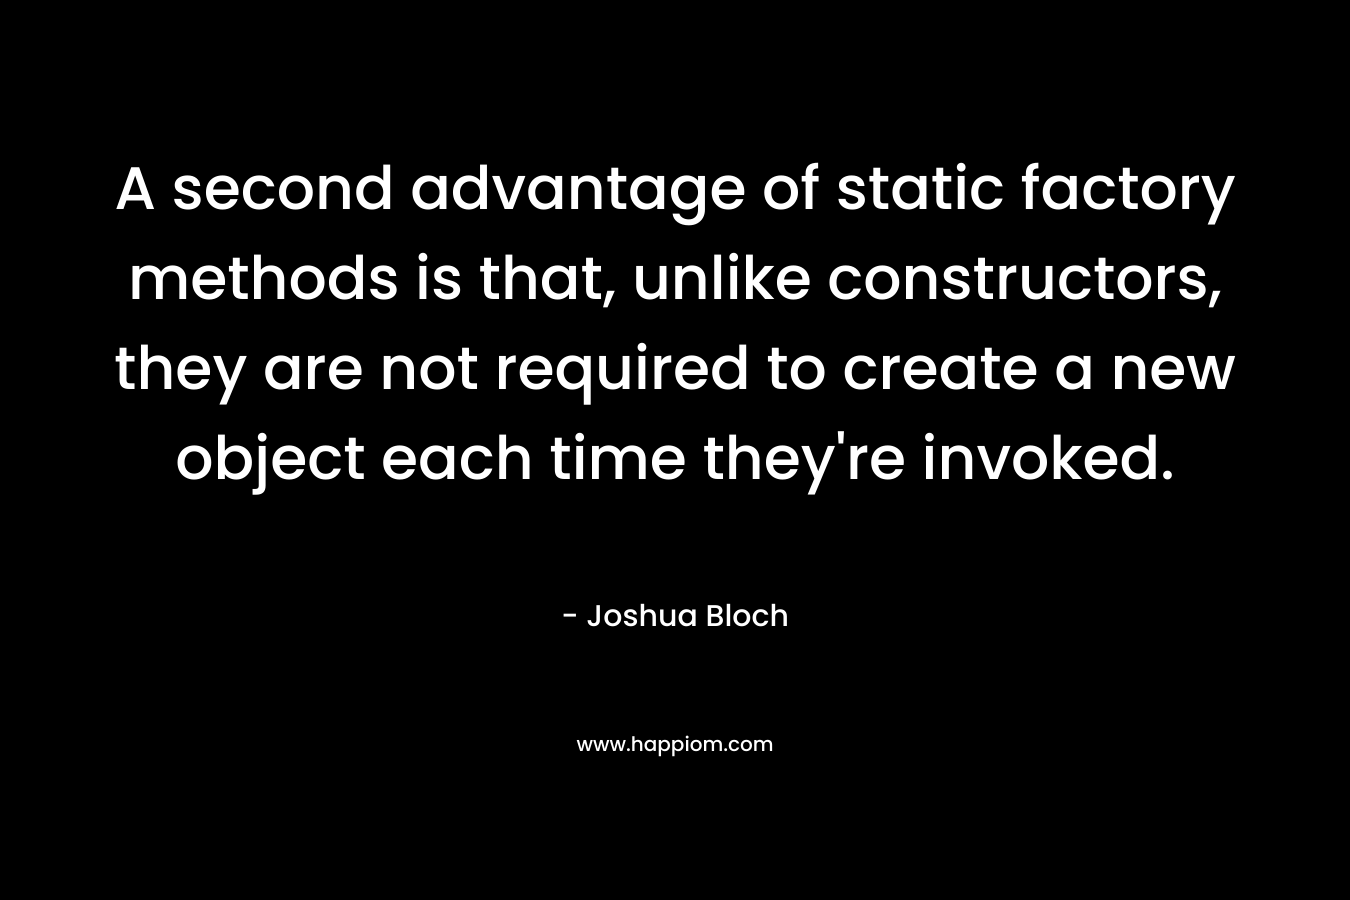 A second advantage of static factory methods is that, unlike constructors, they are not required to create a new object each time they’re invoked. – Joshua Bloch